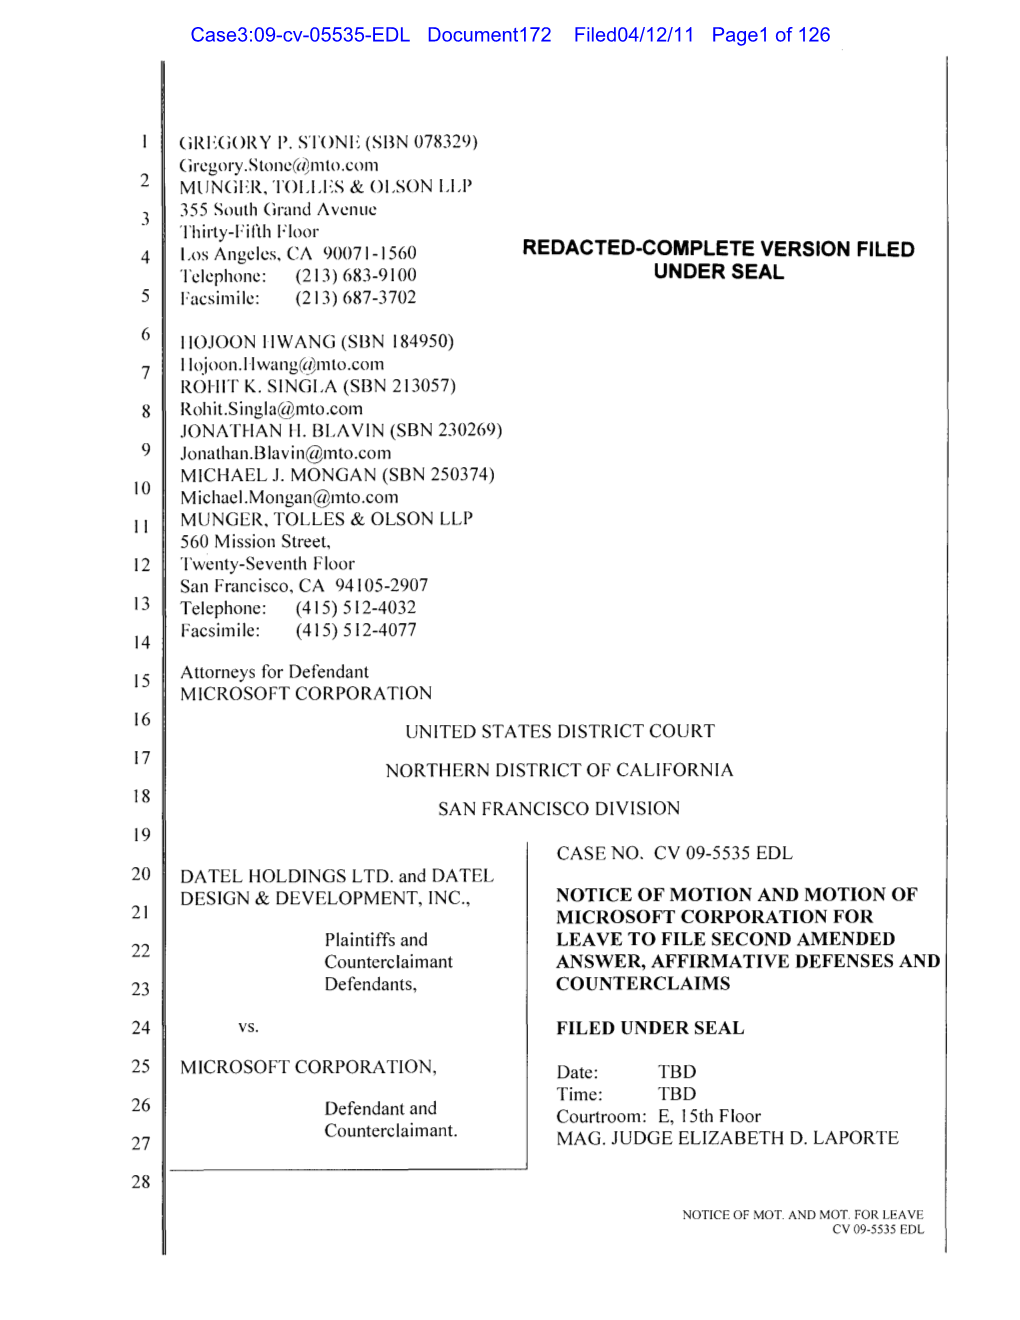 Case3:09-Cv-05535-EDL Document172 Filed04/12/11 Page1 of 126